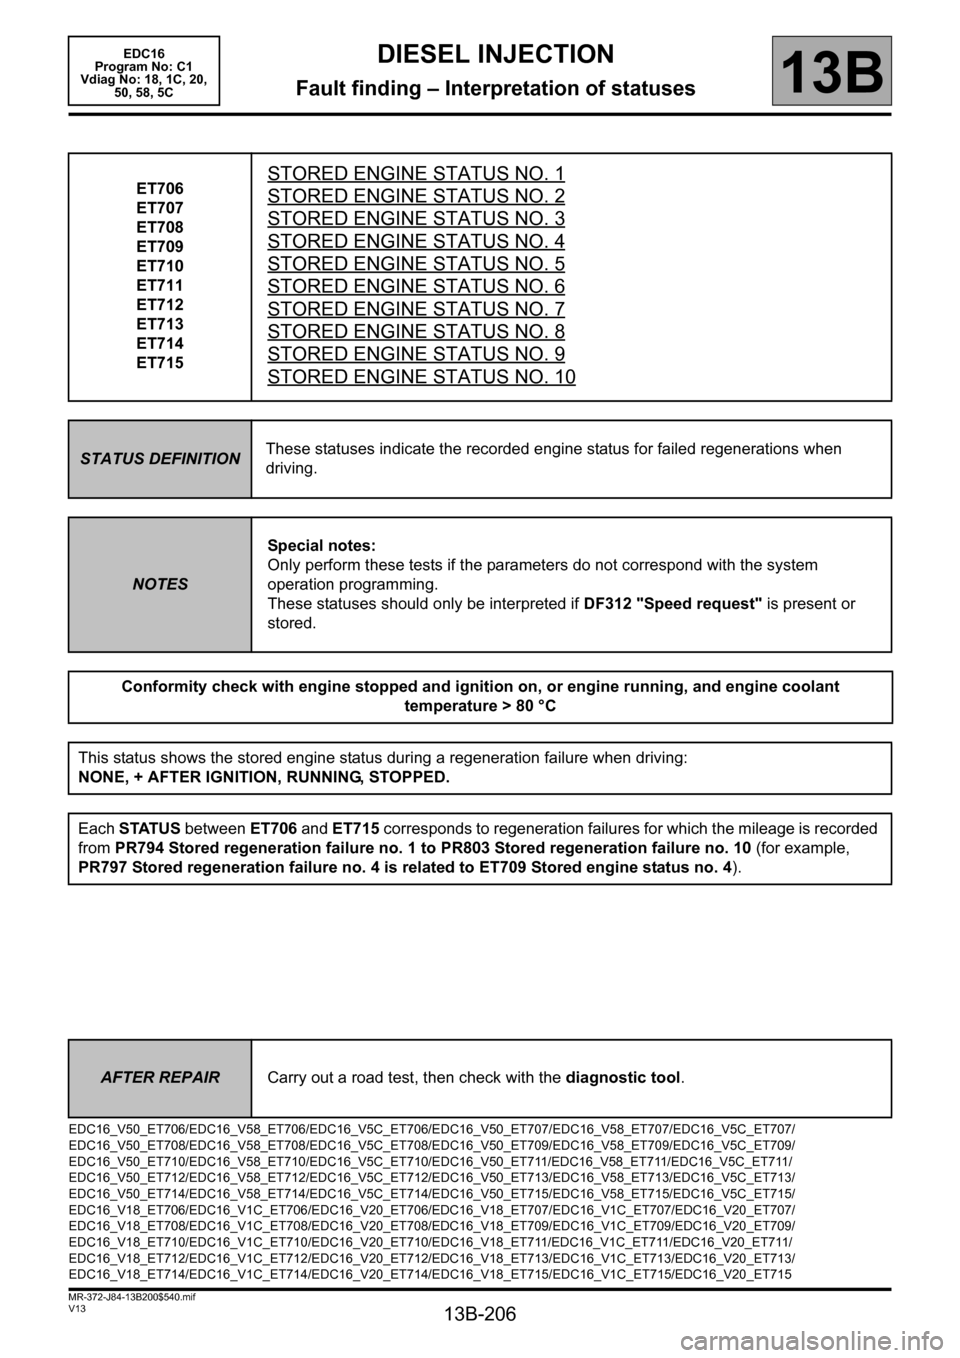 RENAULT SCENIC 2011 J95 / 3.G Engine And Peripherals EDC16 Service Manual 13B-206
MR-372-J84-13B200$540.mif
V13
DIESEL INJECTION
Fault finding – Interpretation of statuses
EDC16  
Program No: C1 
Vdiag No: 18, 1C, 20, 
50, 58, 5C
13B
ET706
ET707
ET708
ET709
ET710
ET711
ET